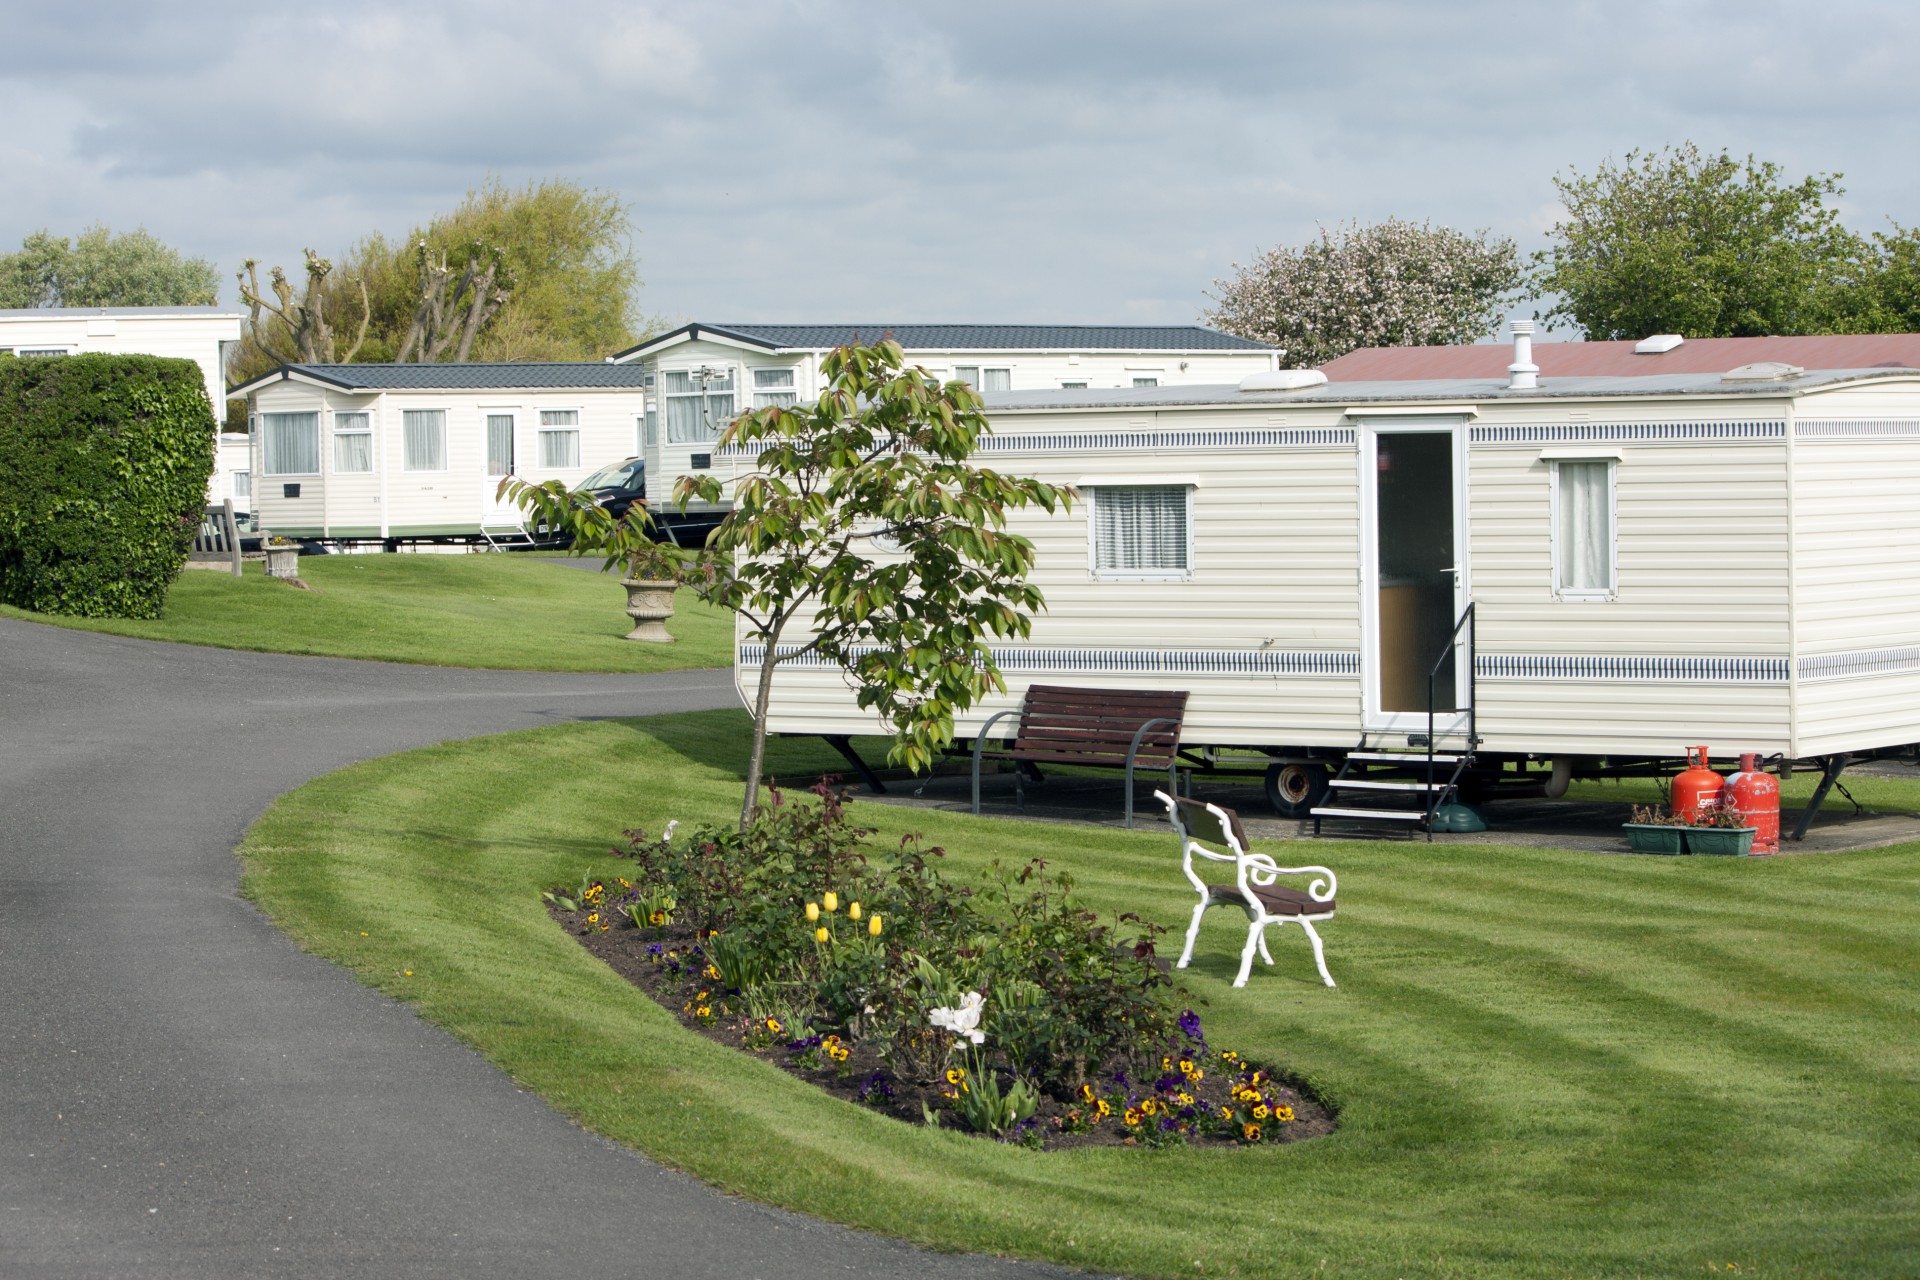 How do I look for mobile home insurance?